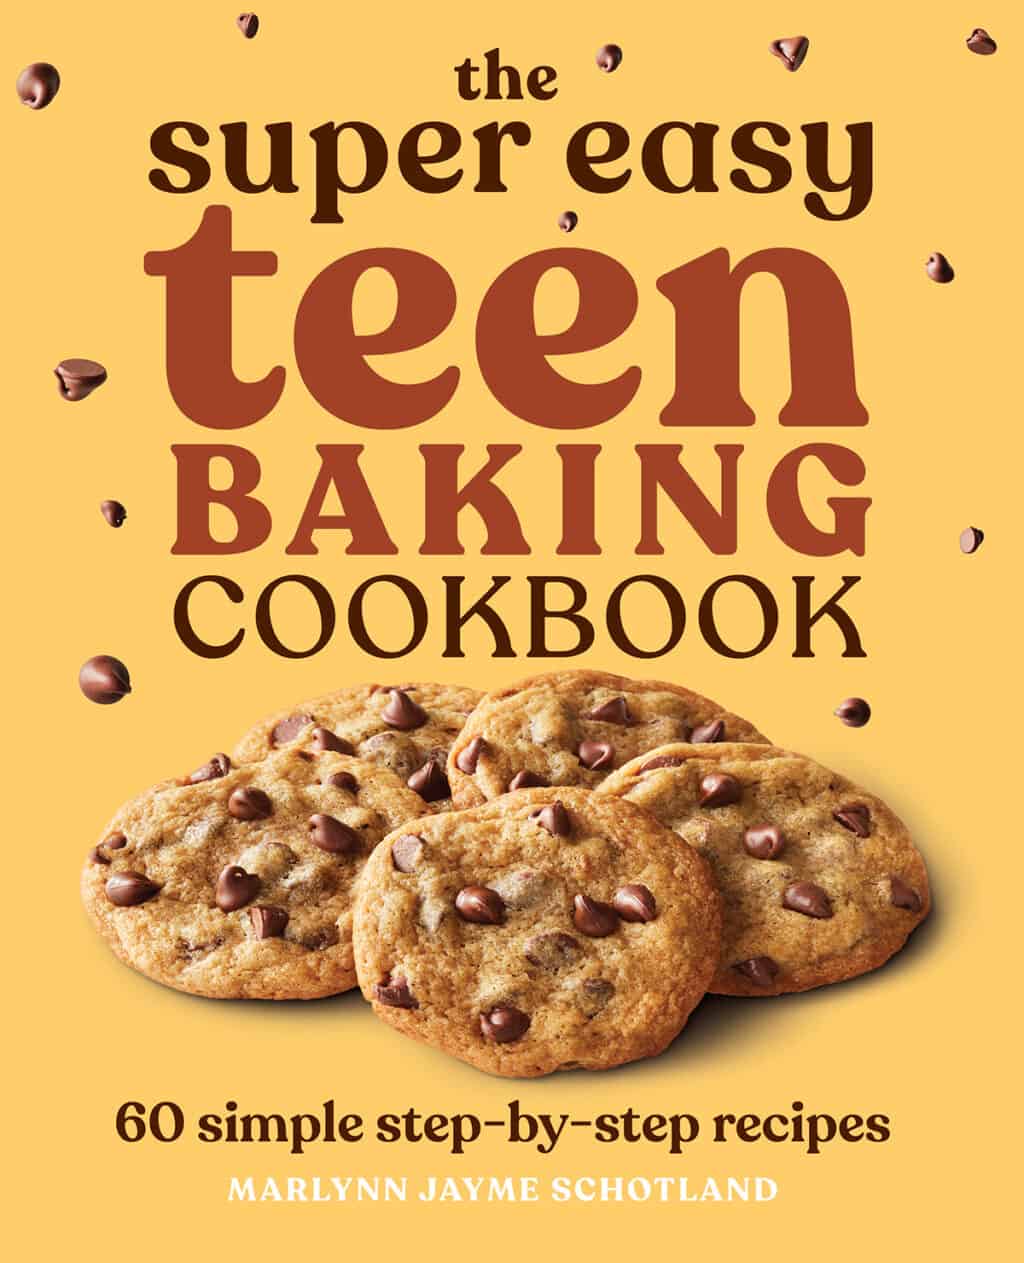 Cover of The Super Easy Teen Baking Cookbook with chocolate chip cookies on a yellow background.